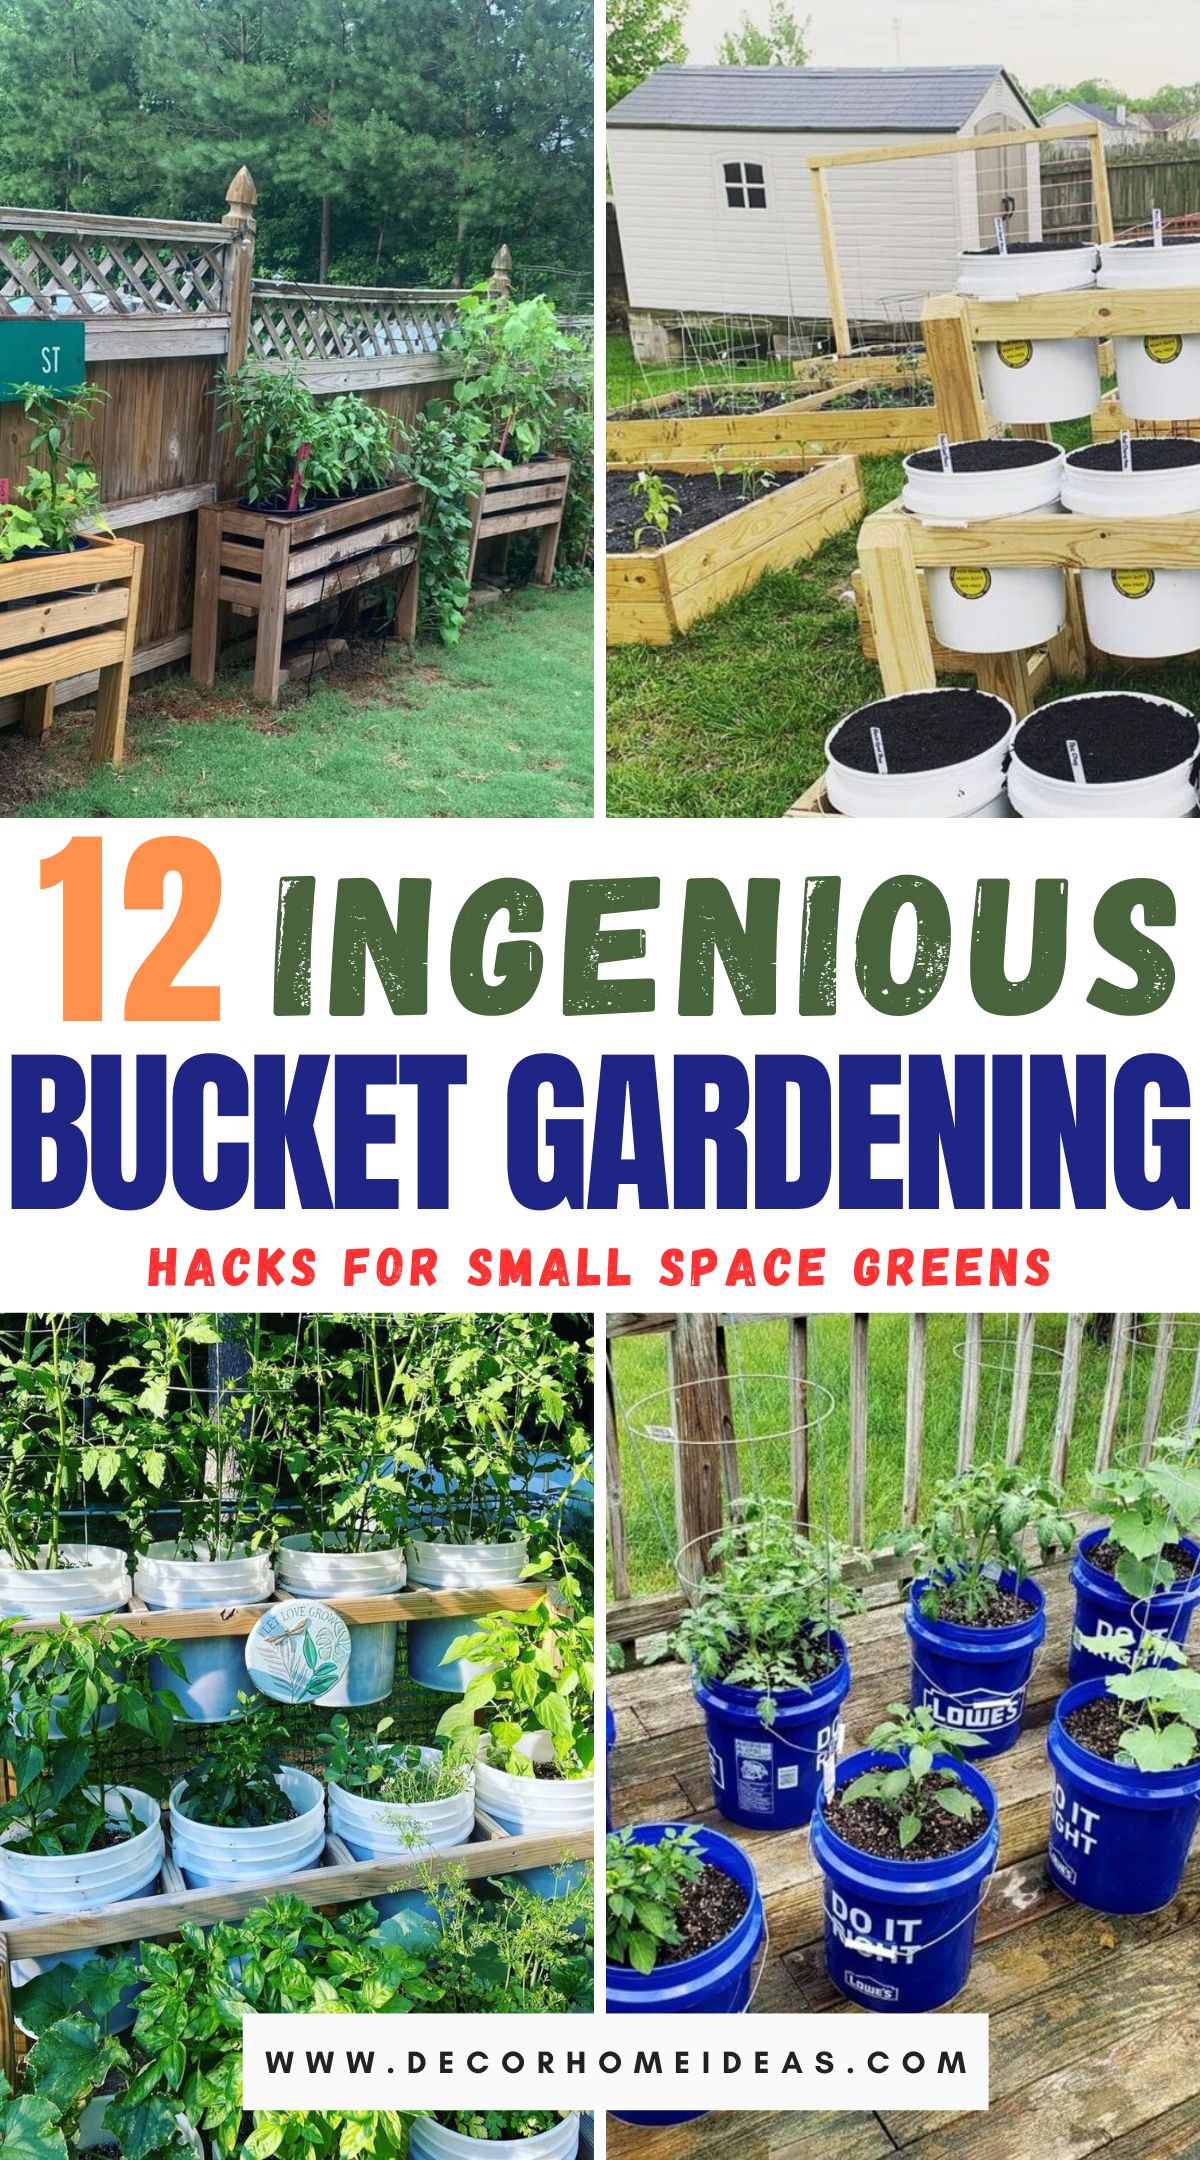 Elevate your urban oasis with these 12 bucket gardening hacks. From vertical gardening to space-saving techniques, discover innovative ways to cultivate a lush and thriving garden, even in limited urban spaces.